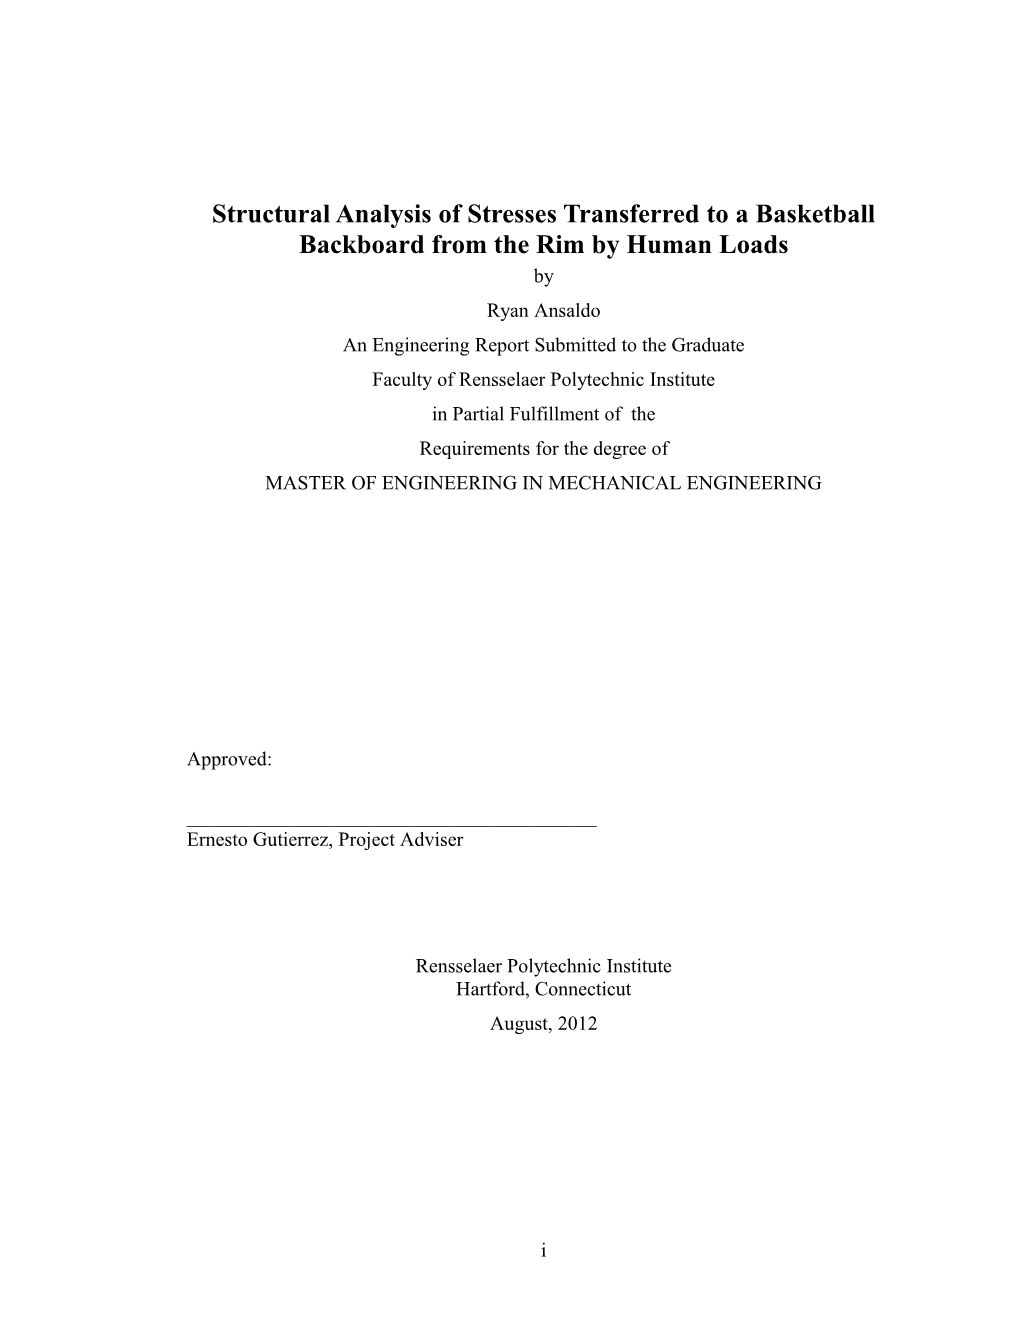 Structural Analysis of Stresses Transferred to a Basketball Backboard from the Rim By